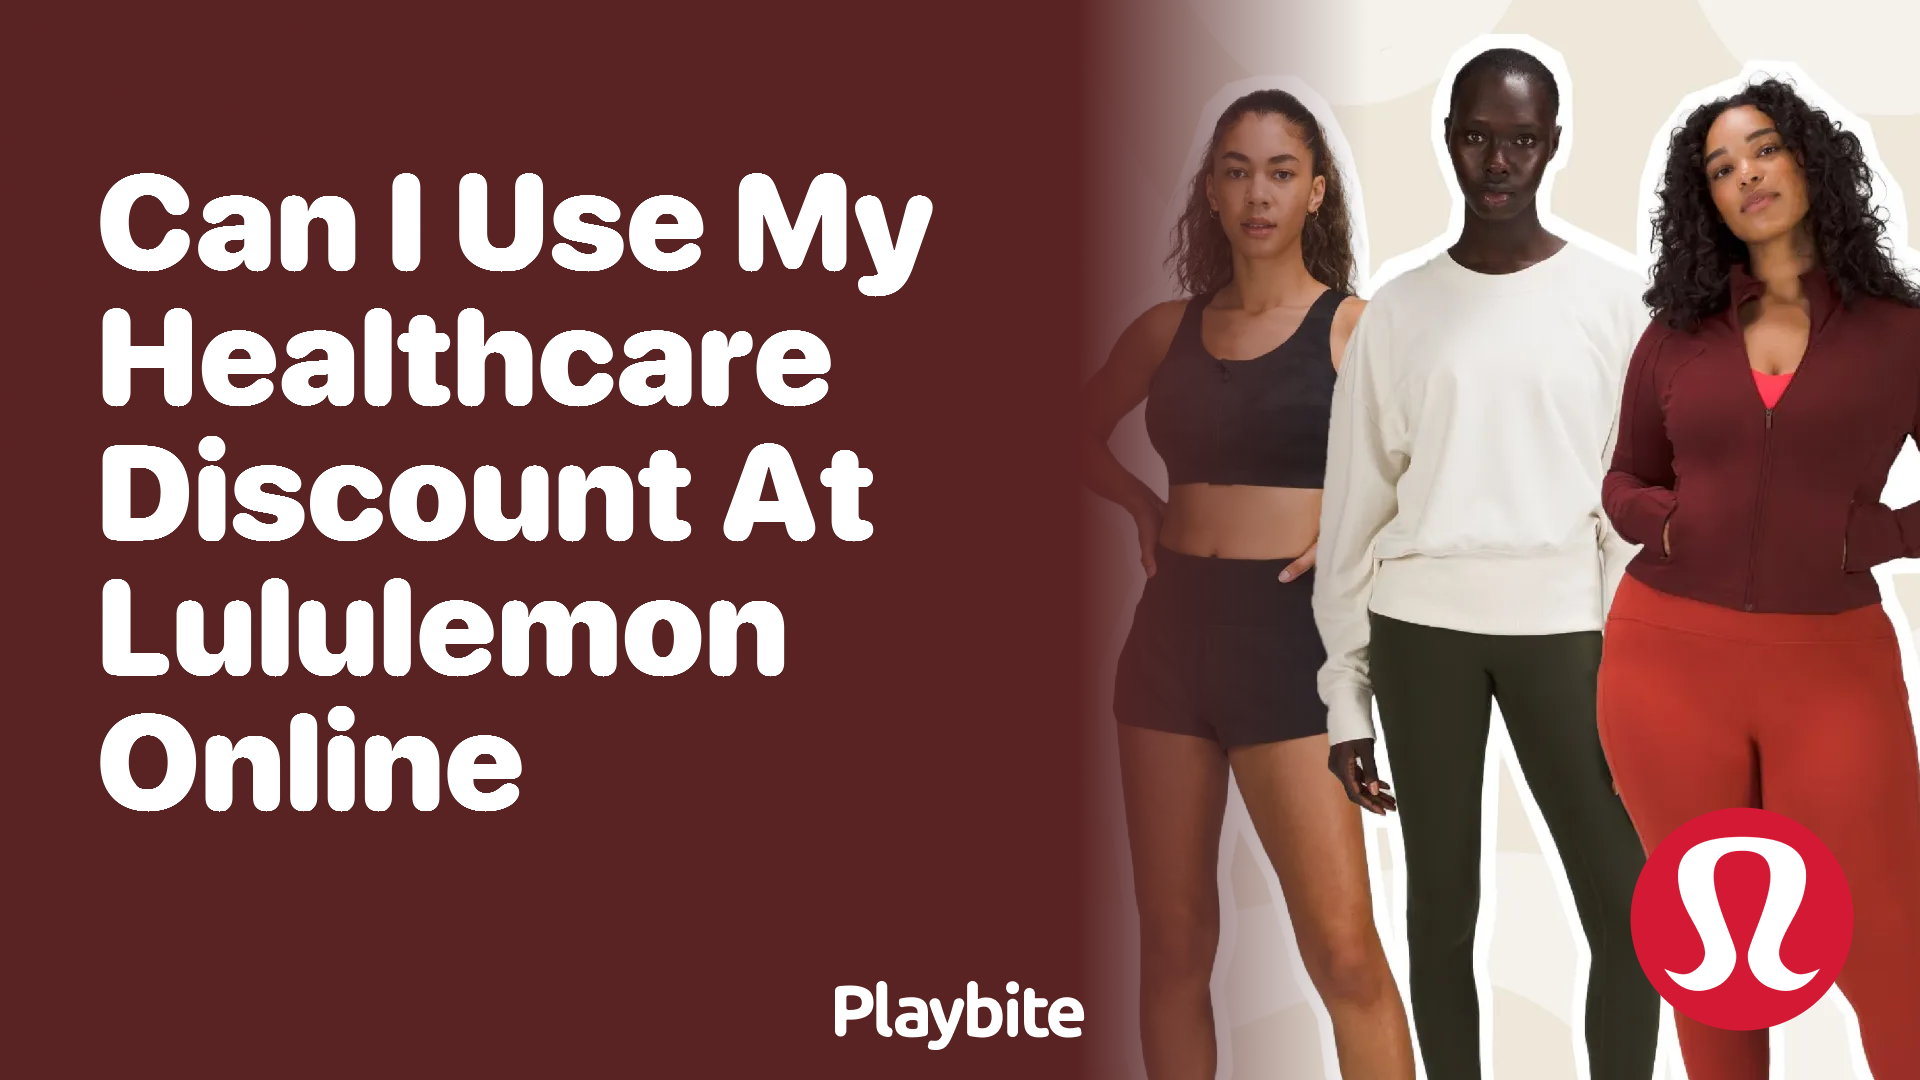 Can I Use My Healthcare Discount at Lululemon Online? - Playbite